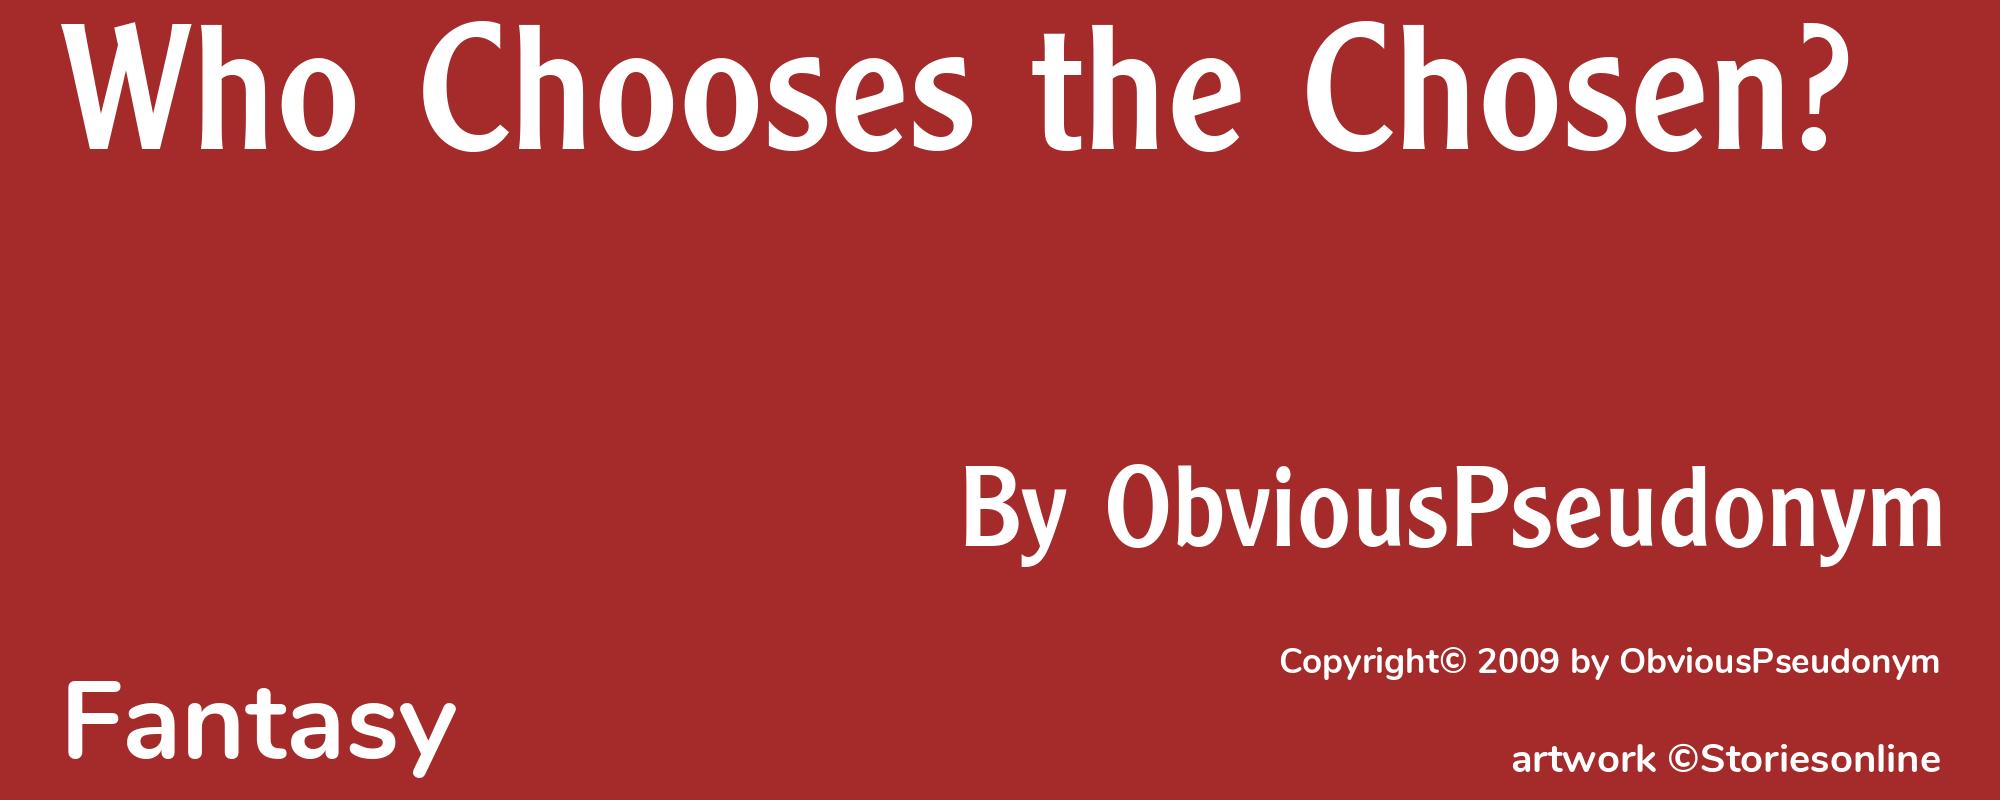 Who Chooses the Chosen? - Cover